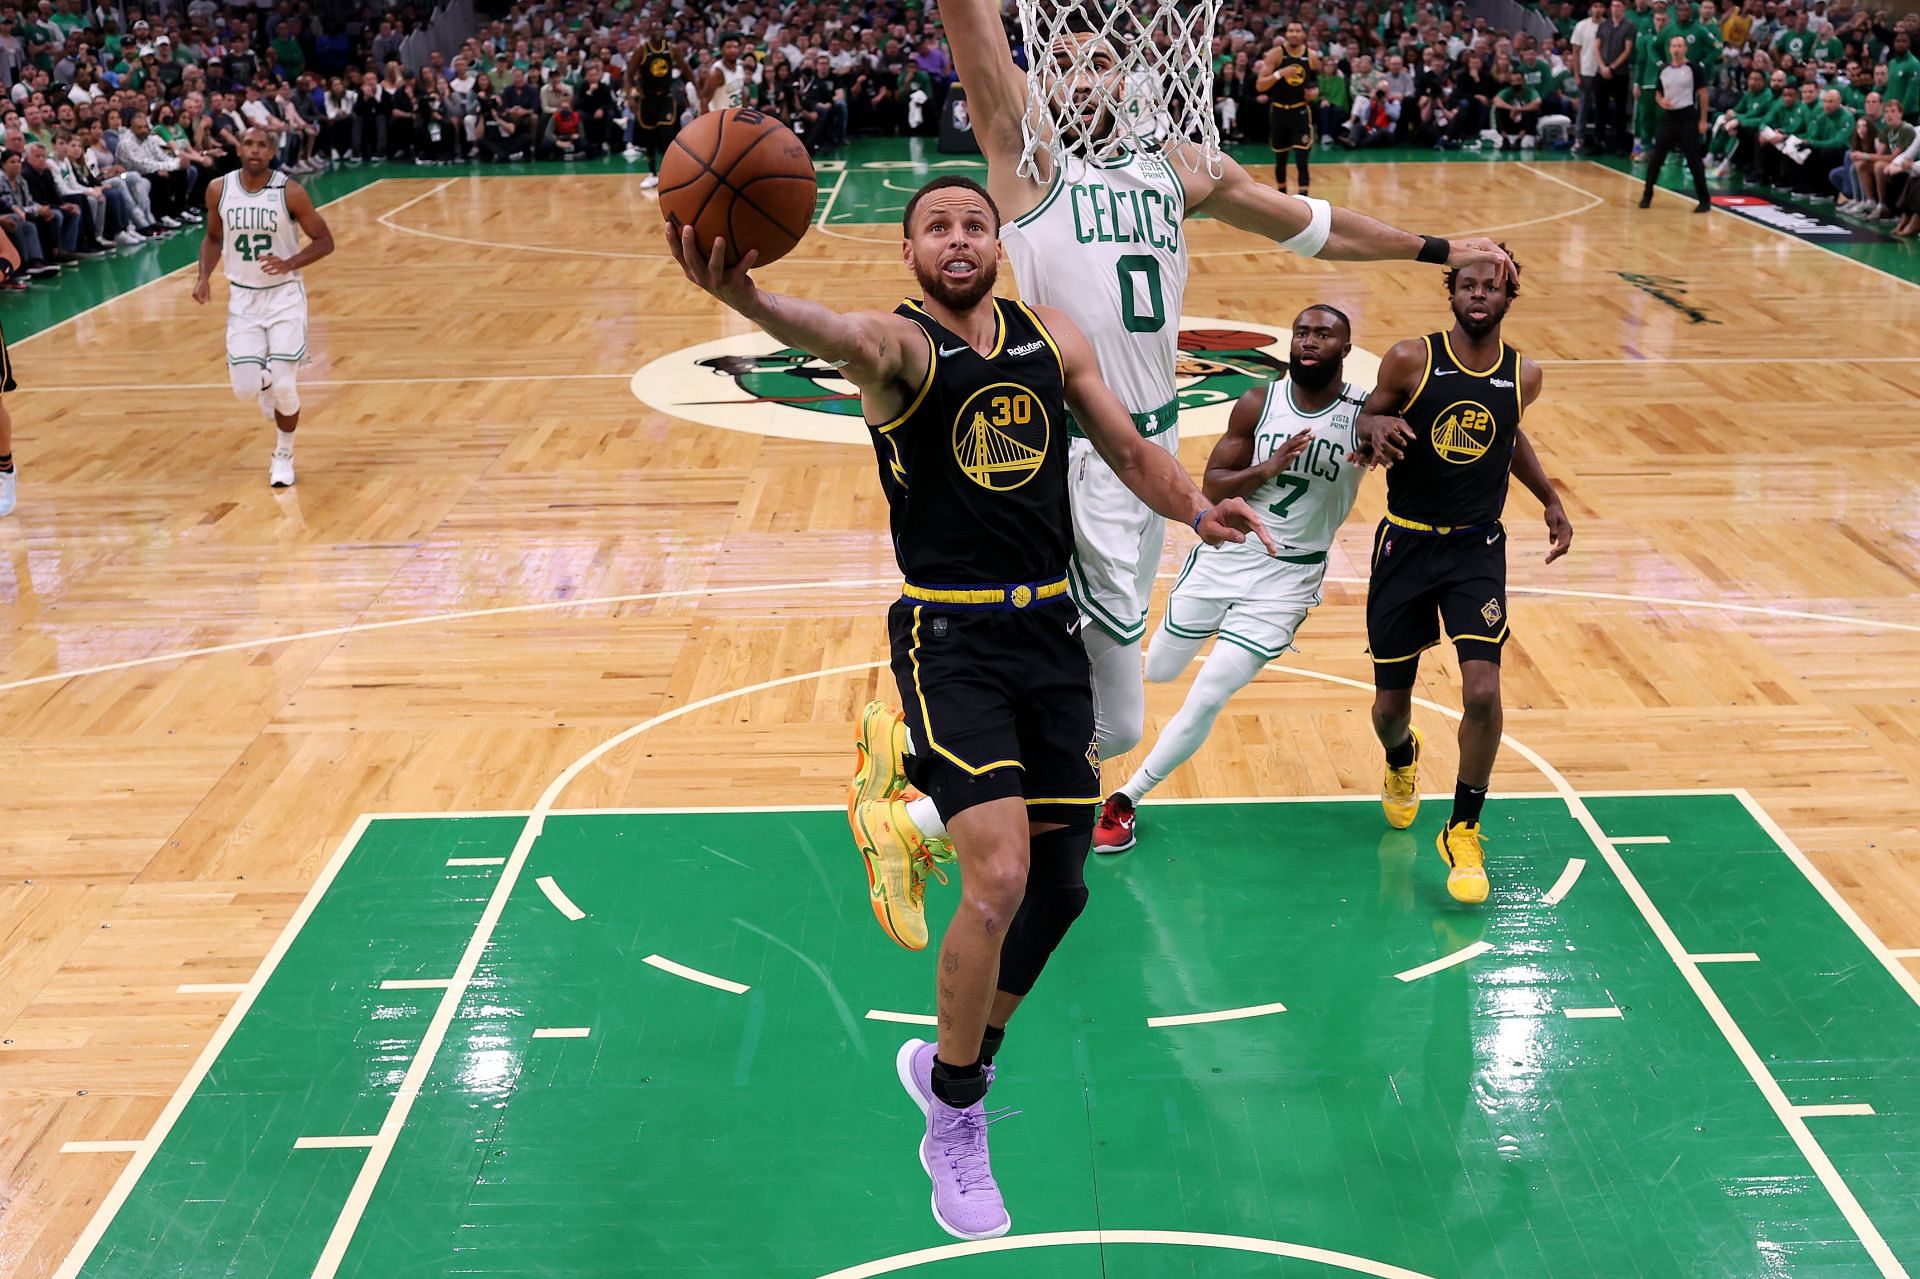 Steph Curry of the Golden State Warriors scores against Jayson Tatum of the Boston Celtics in Game 4 of the 2022 NBA Finals.